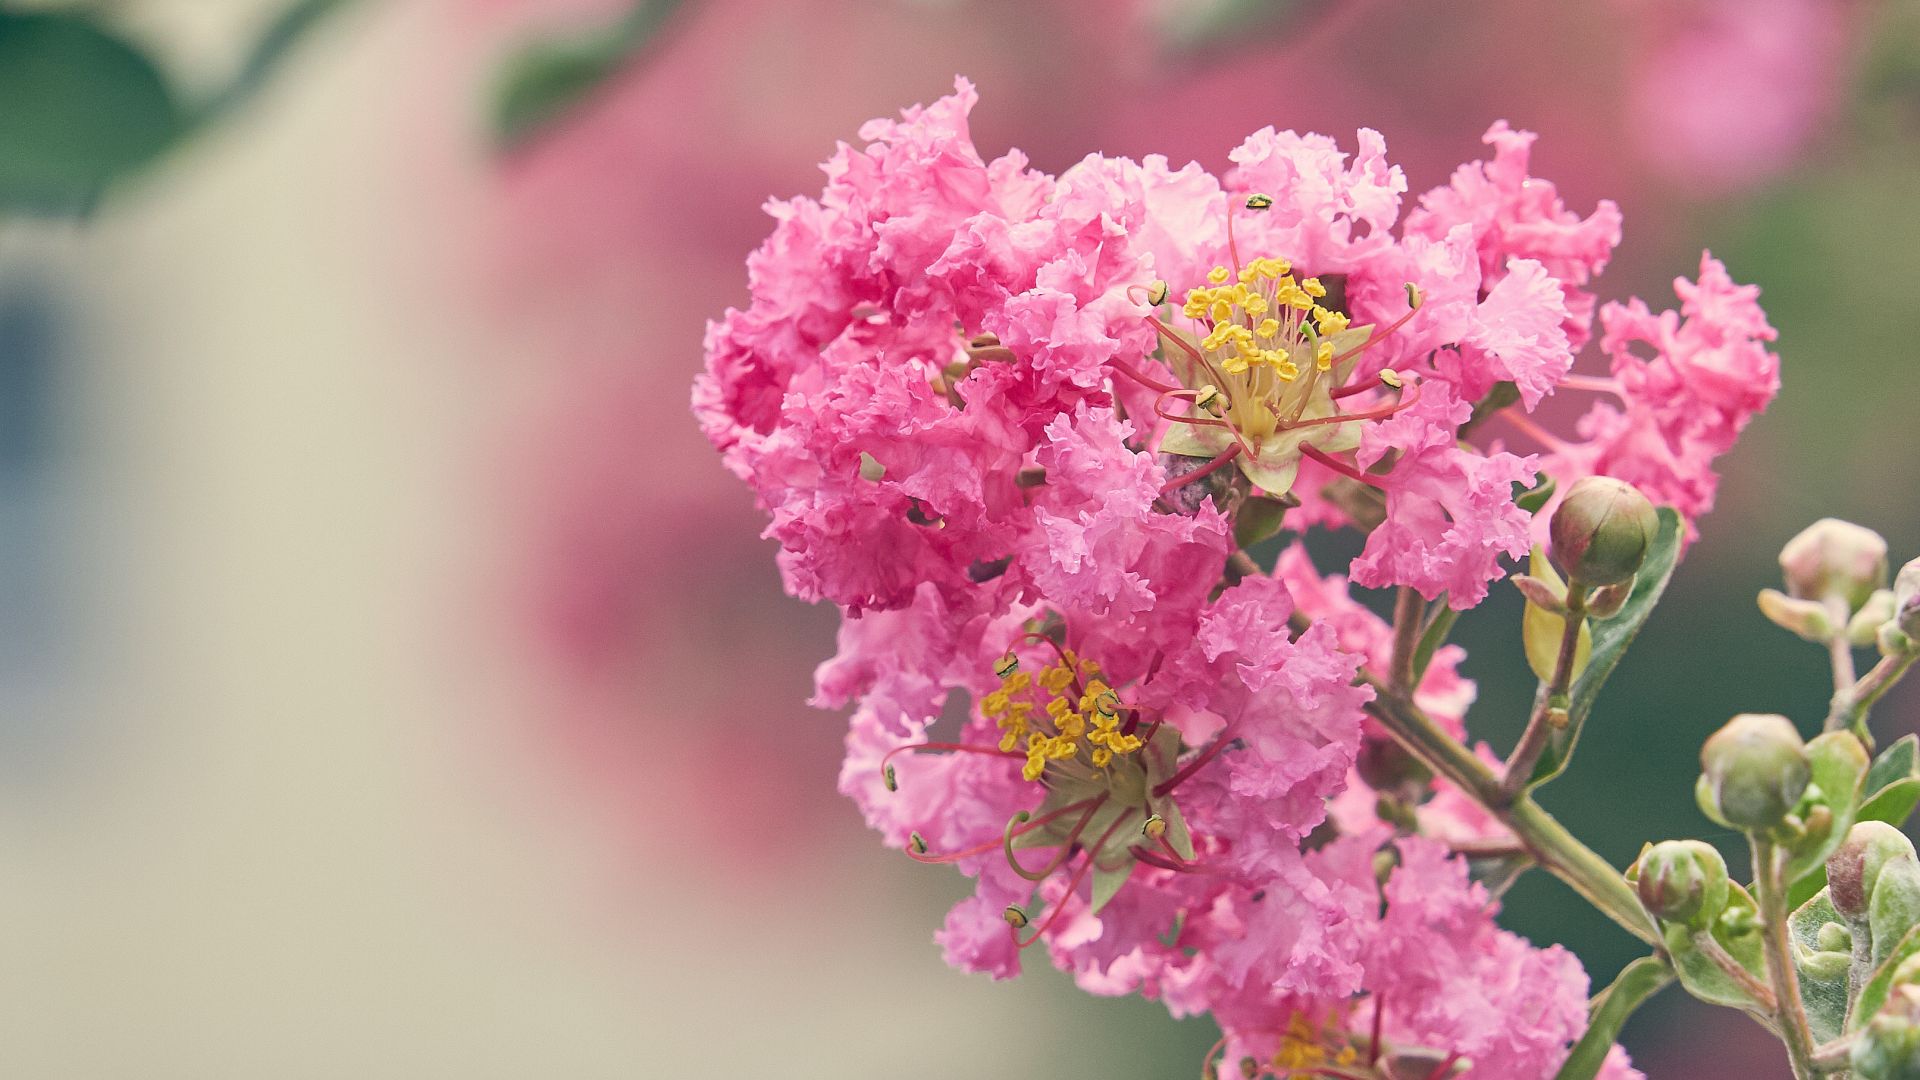 Wallpaper Lagerstroemia, pink flowers, blossom